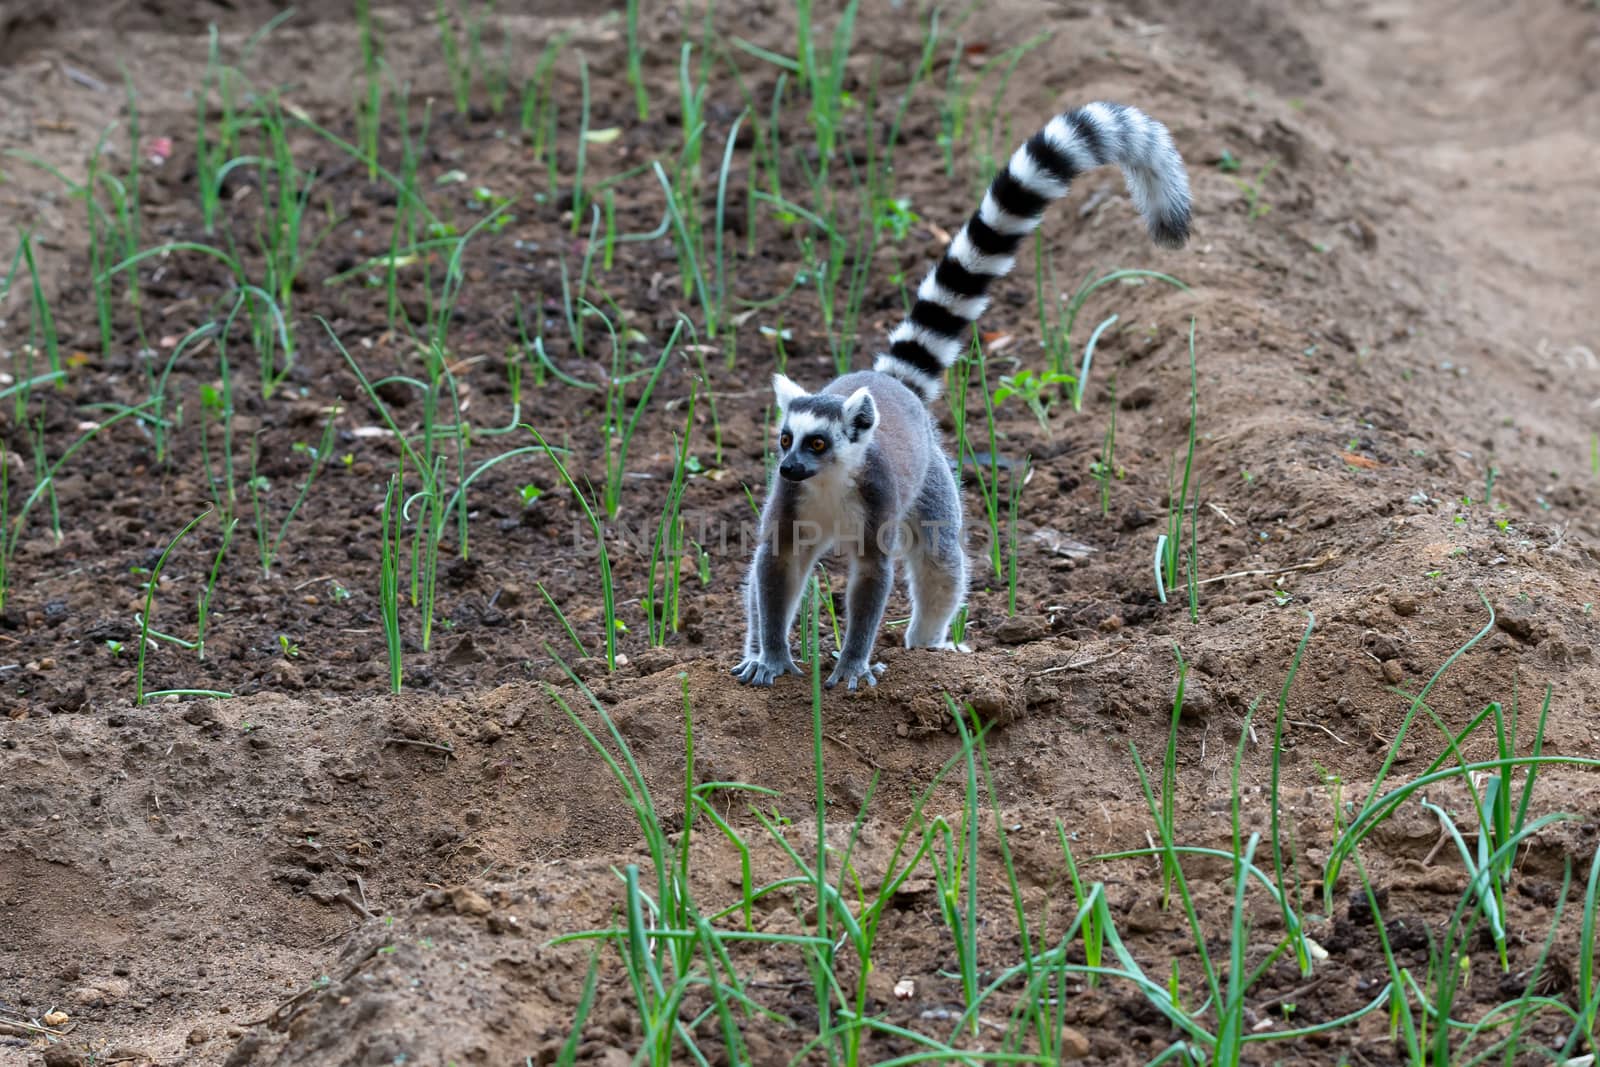 A ring-tailed lemur hops around in the fields of the locals by 25ehaag6